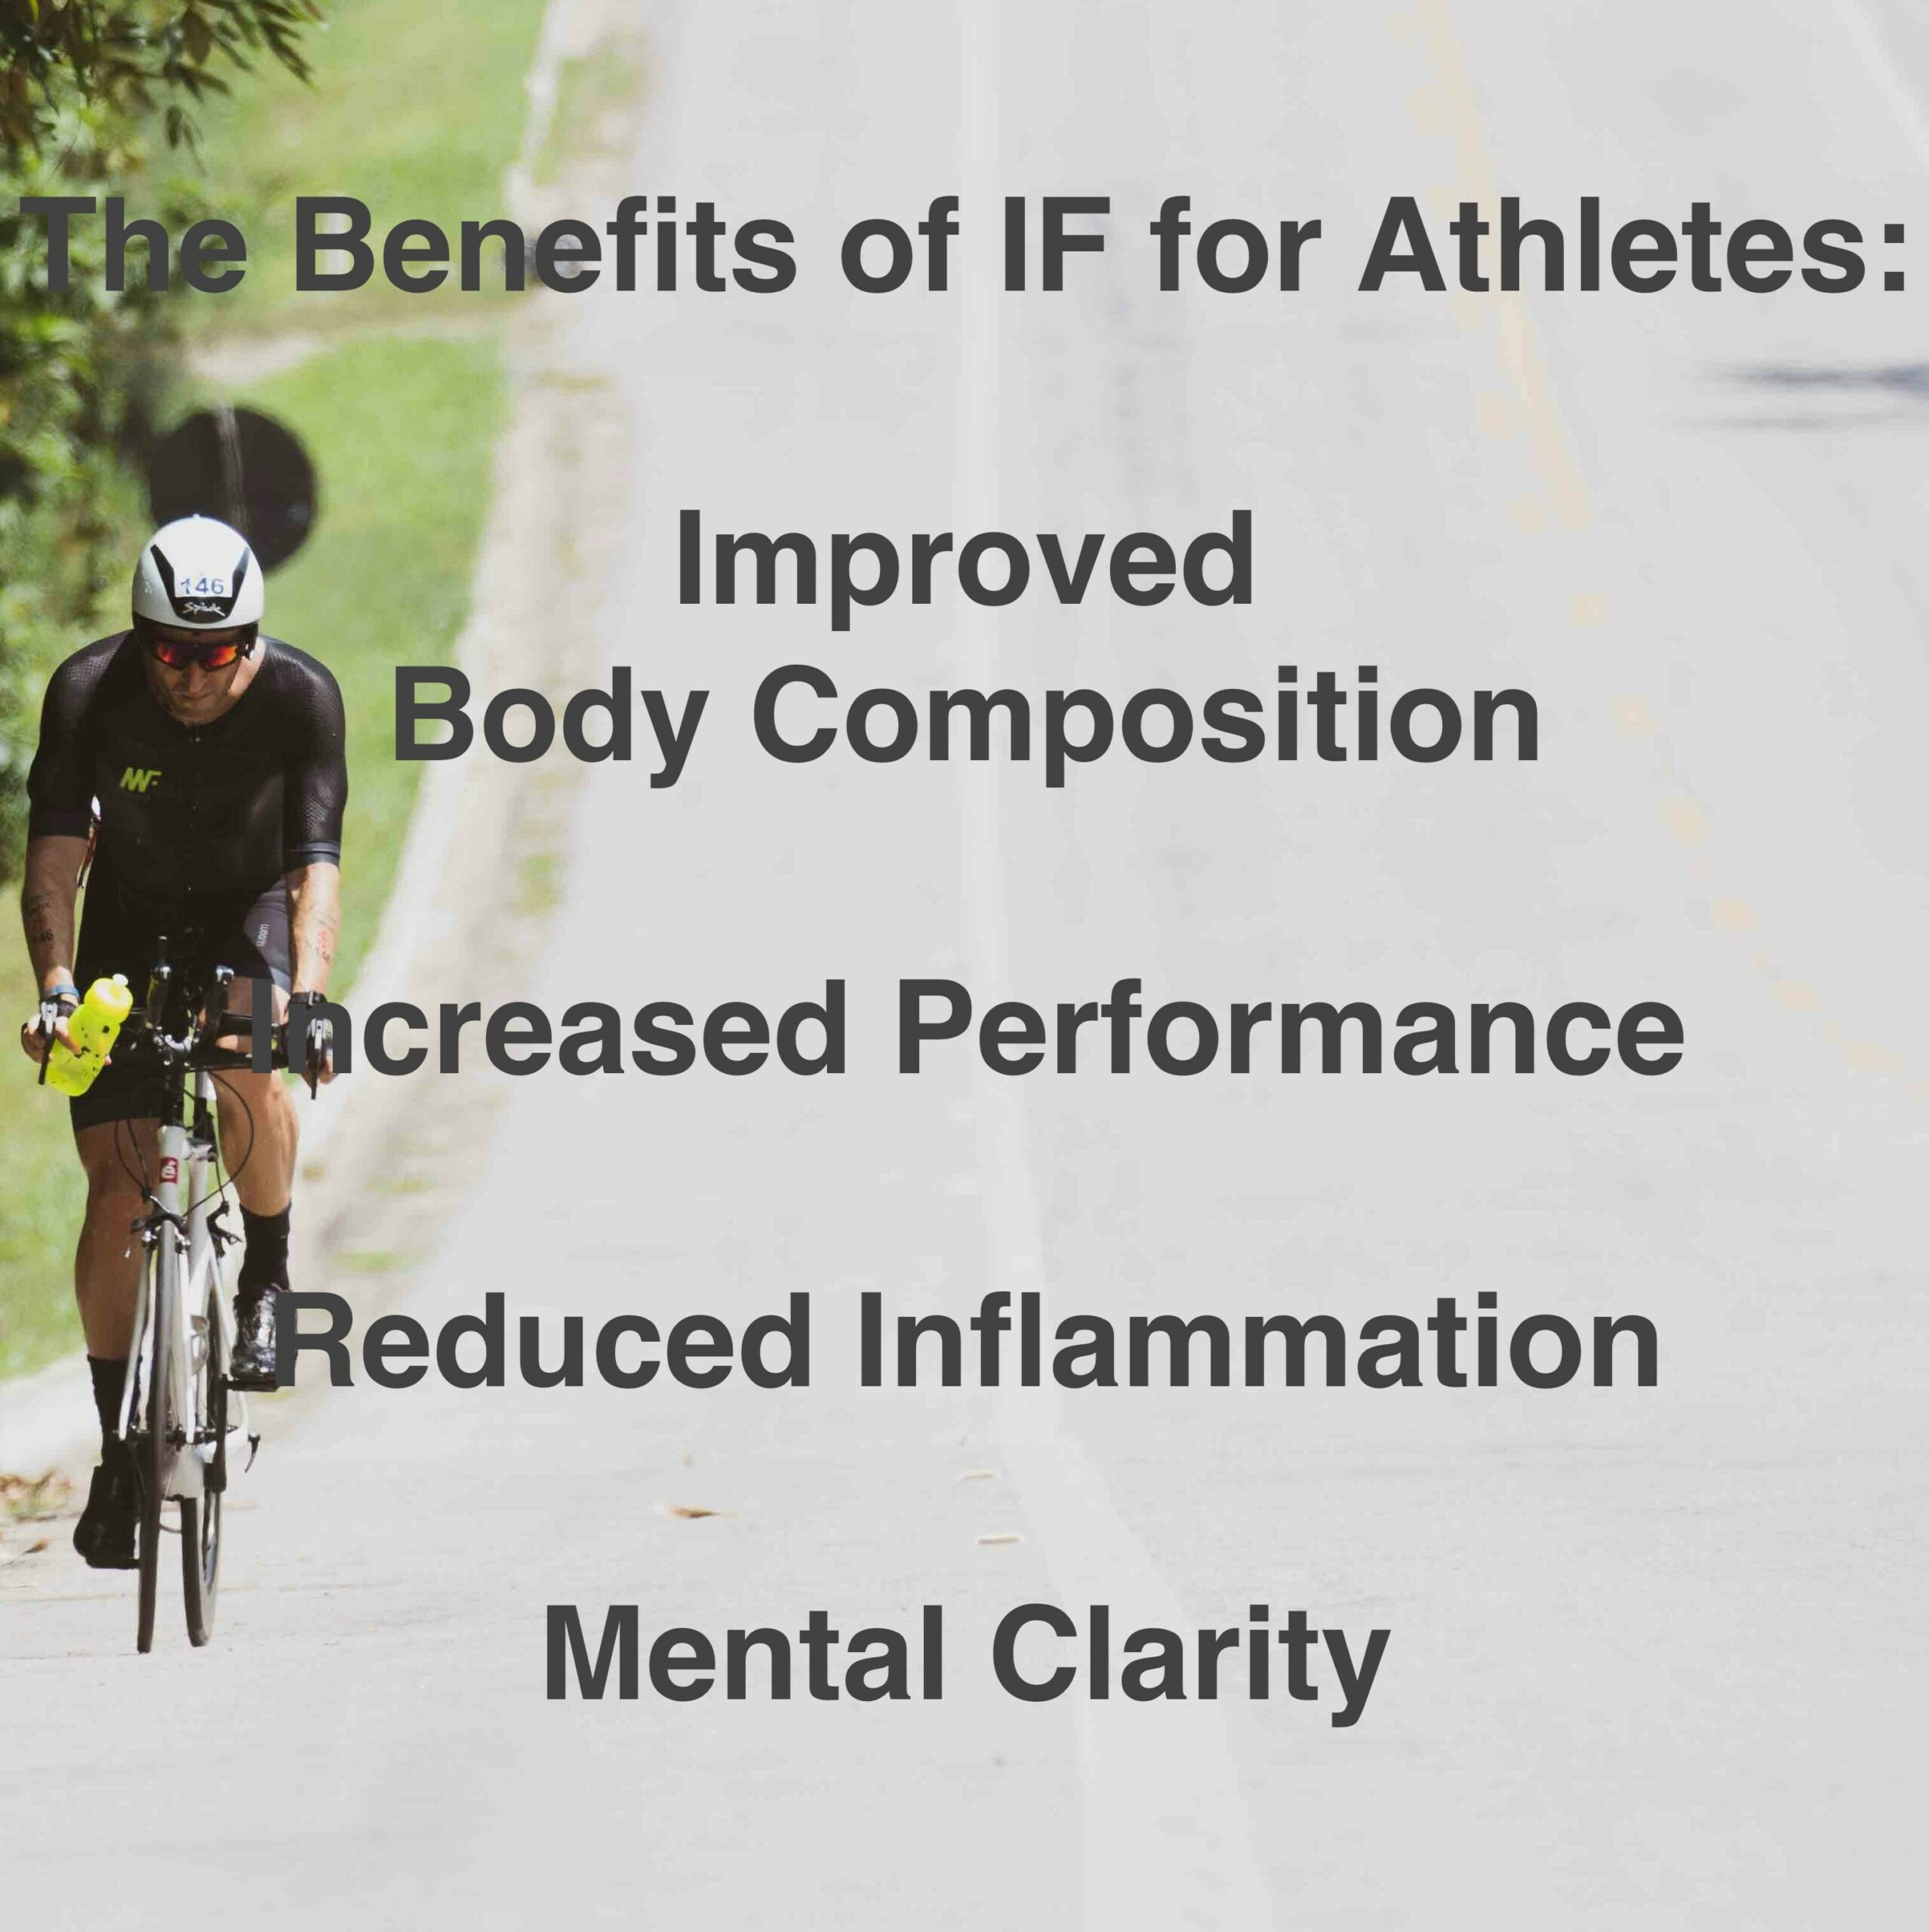 A picture of a biker on a road with the text above: The benefits of IF for Athletes: Improved Body Composition
Increased Performance
Reduced Inflammation
Mental Clarity